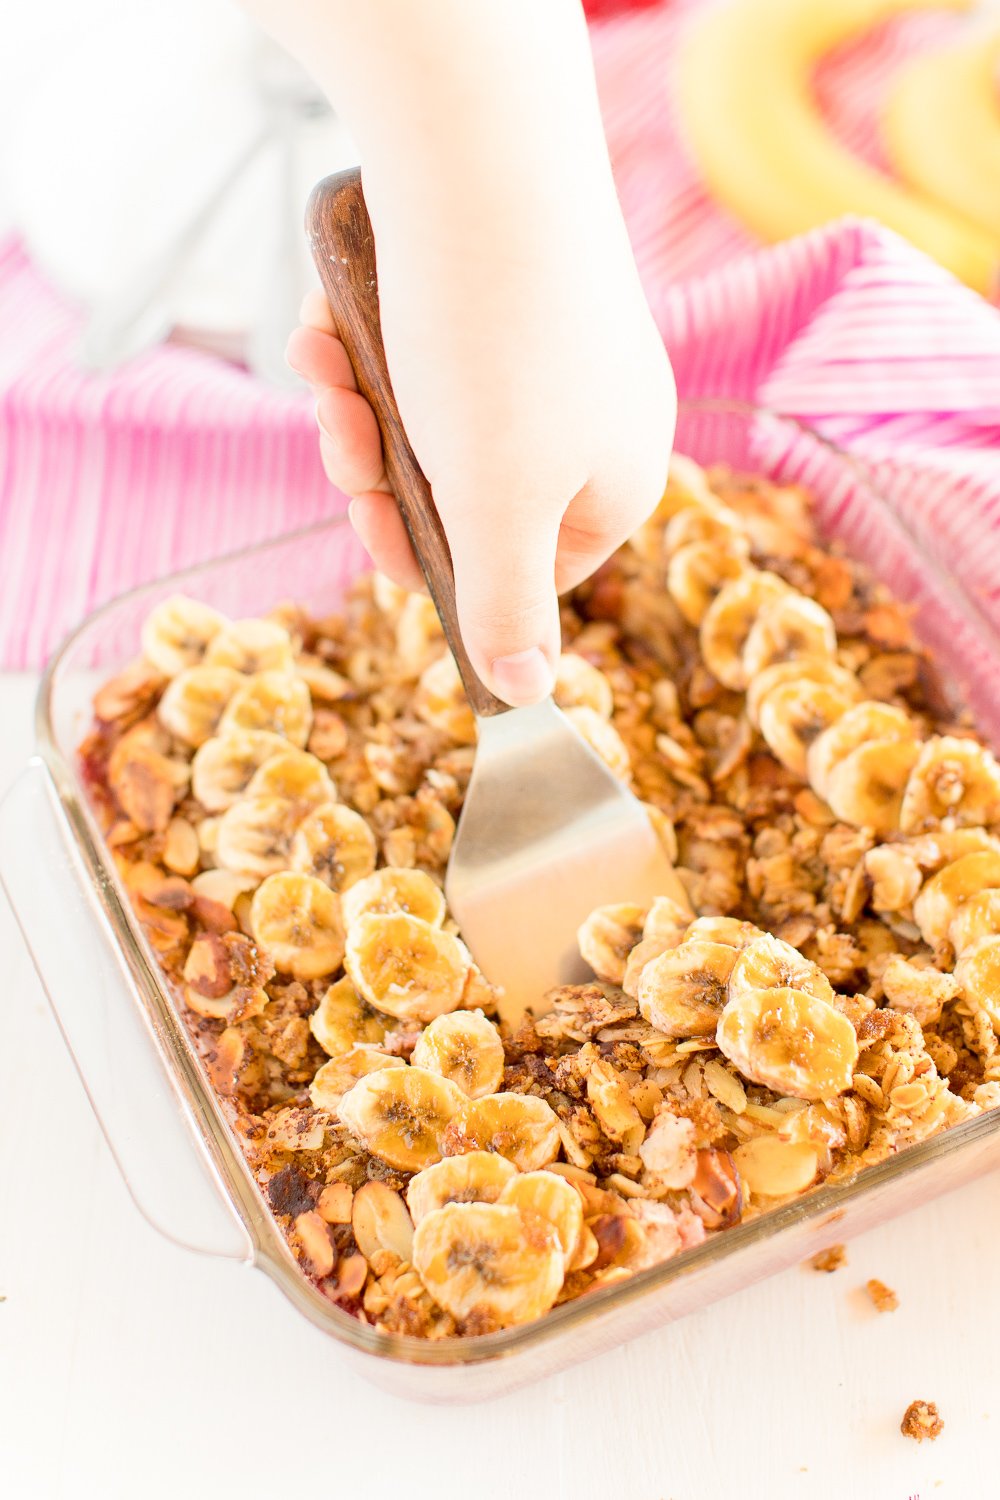 Woman's hand using a spatula to scoop baked oatmeal out of baking dish.